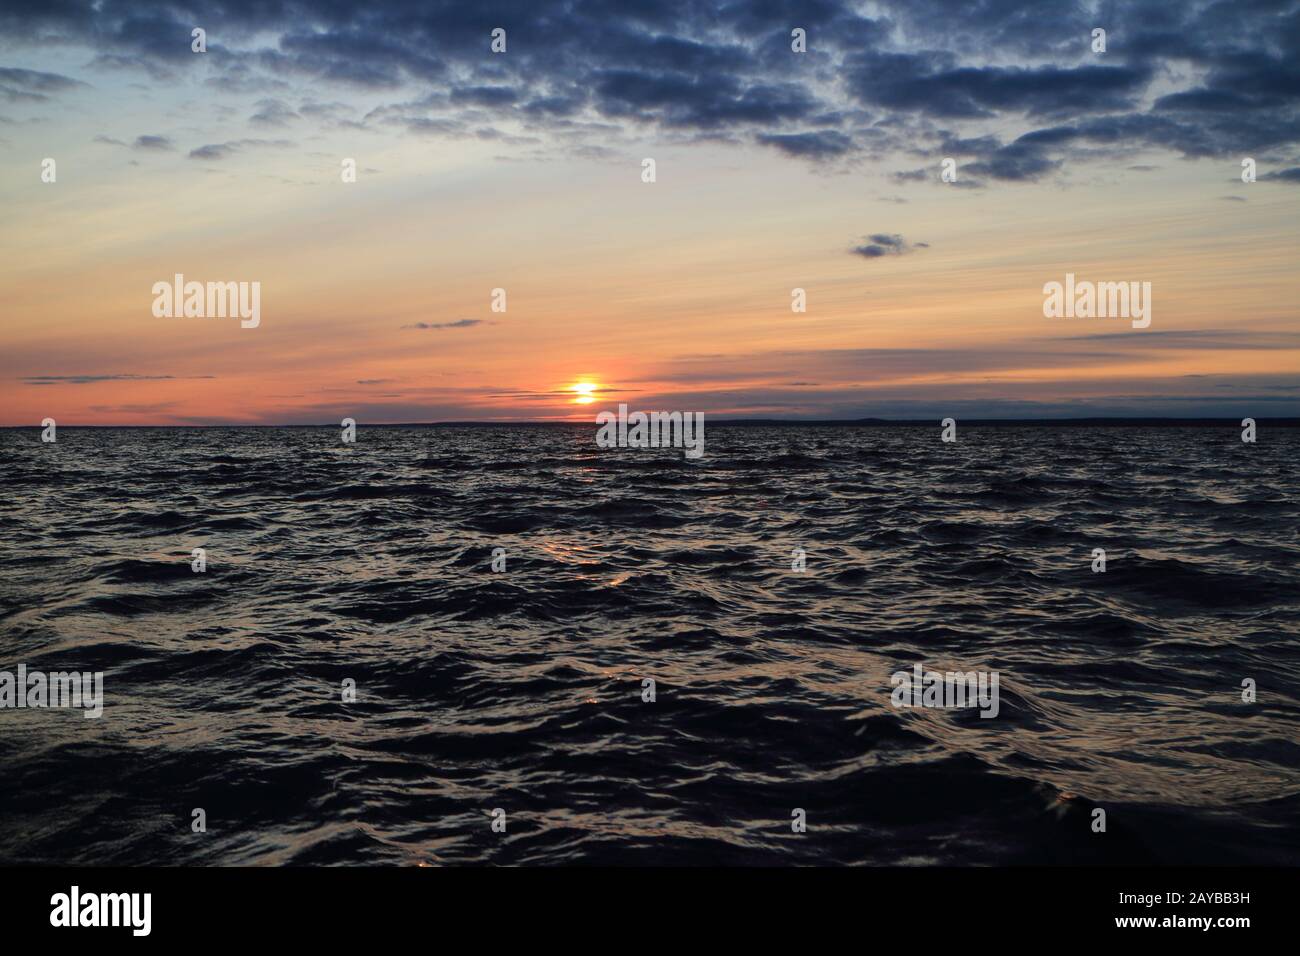 harsh sea in the evening at sunset Stock Photo